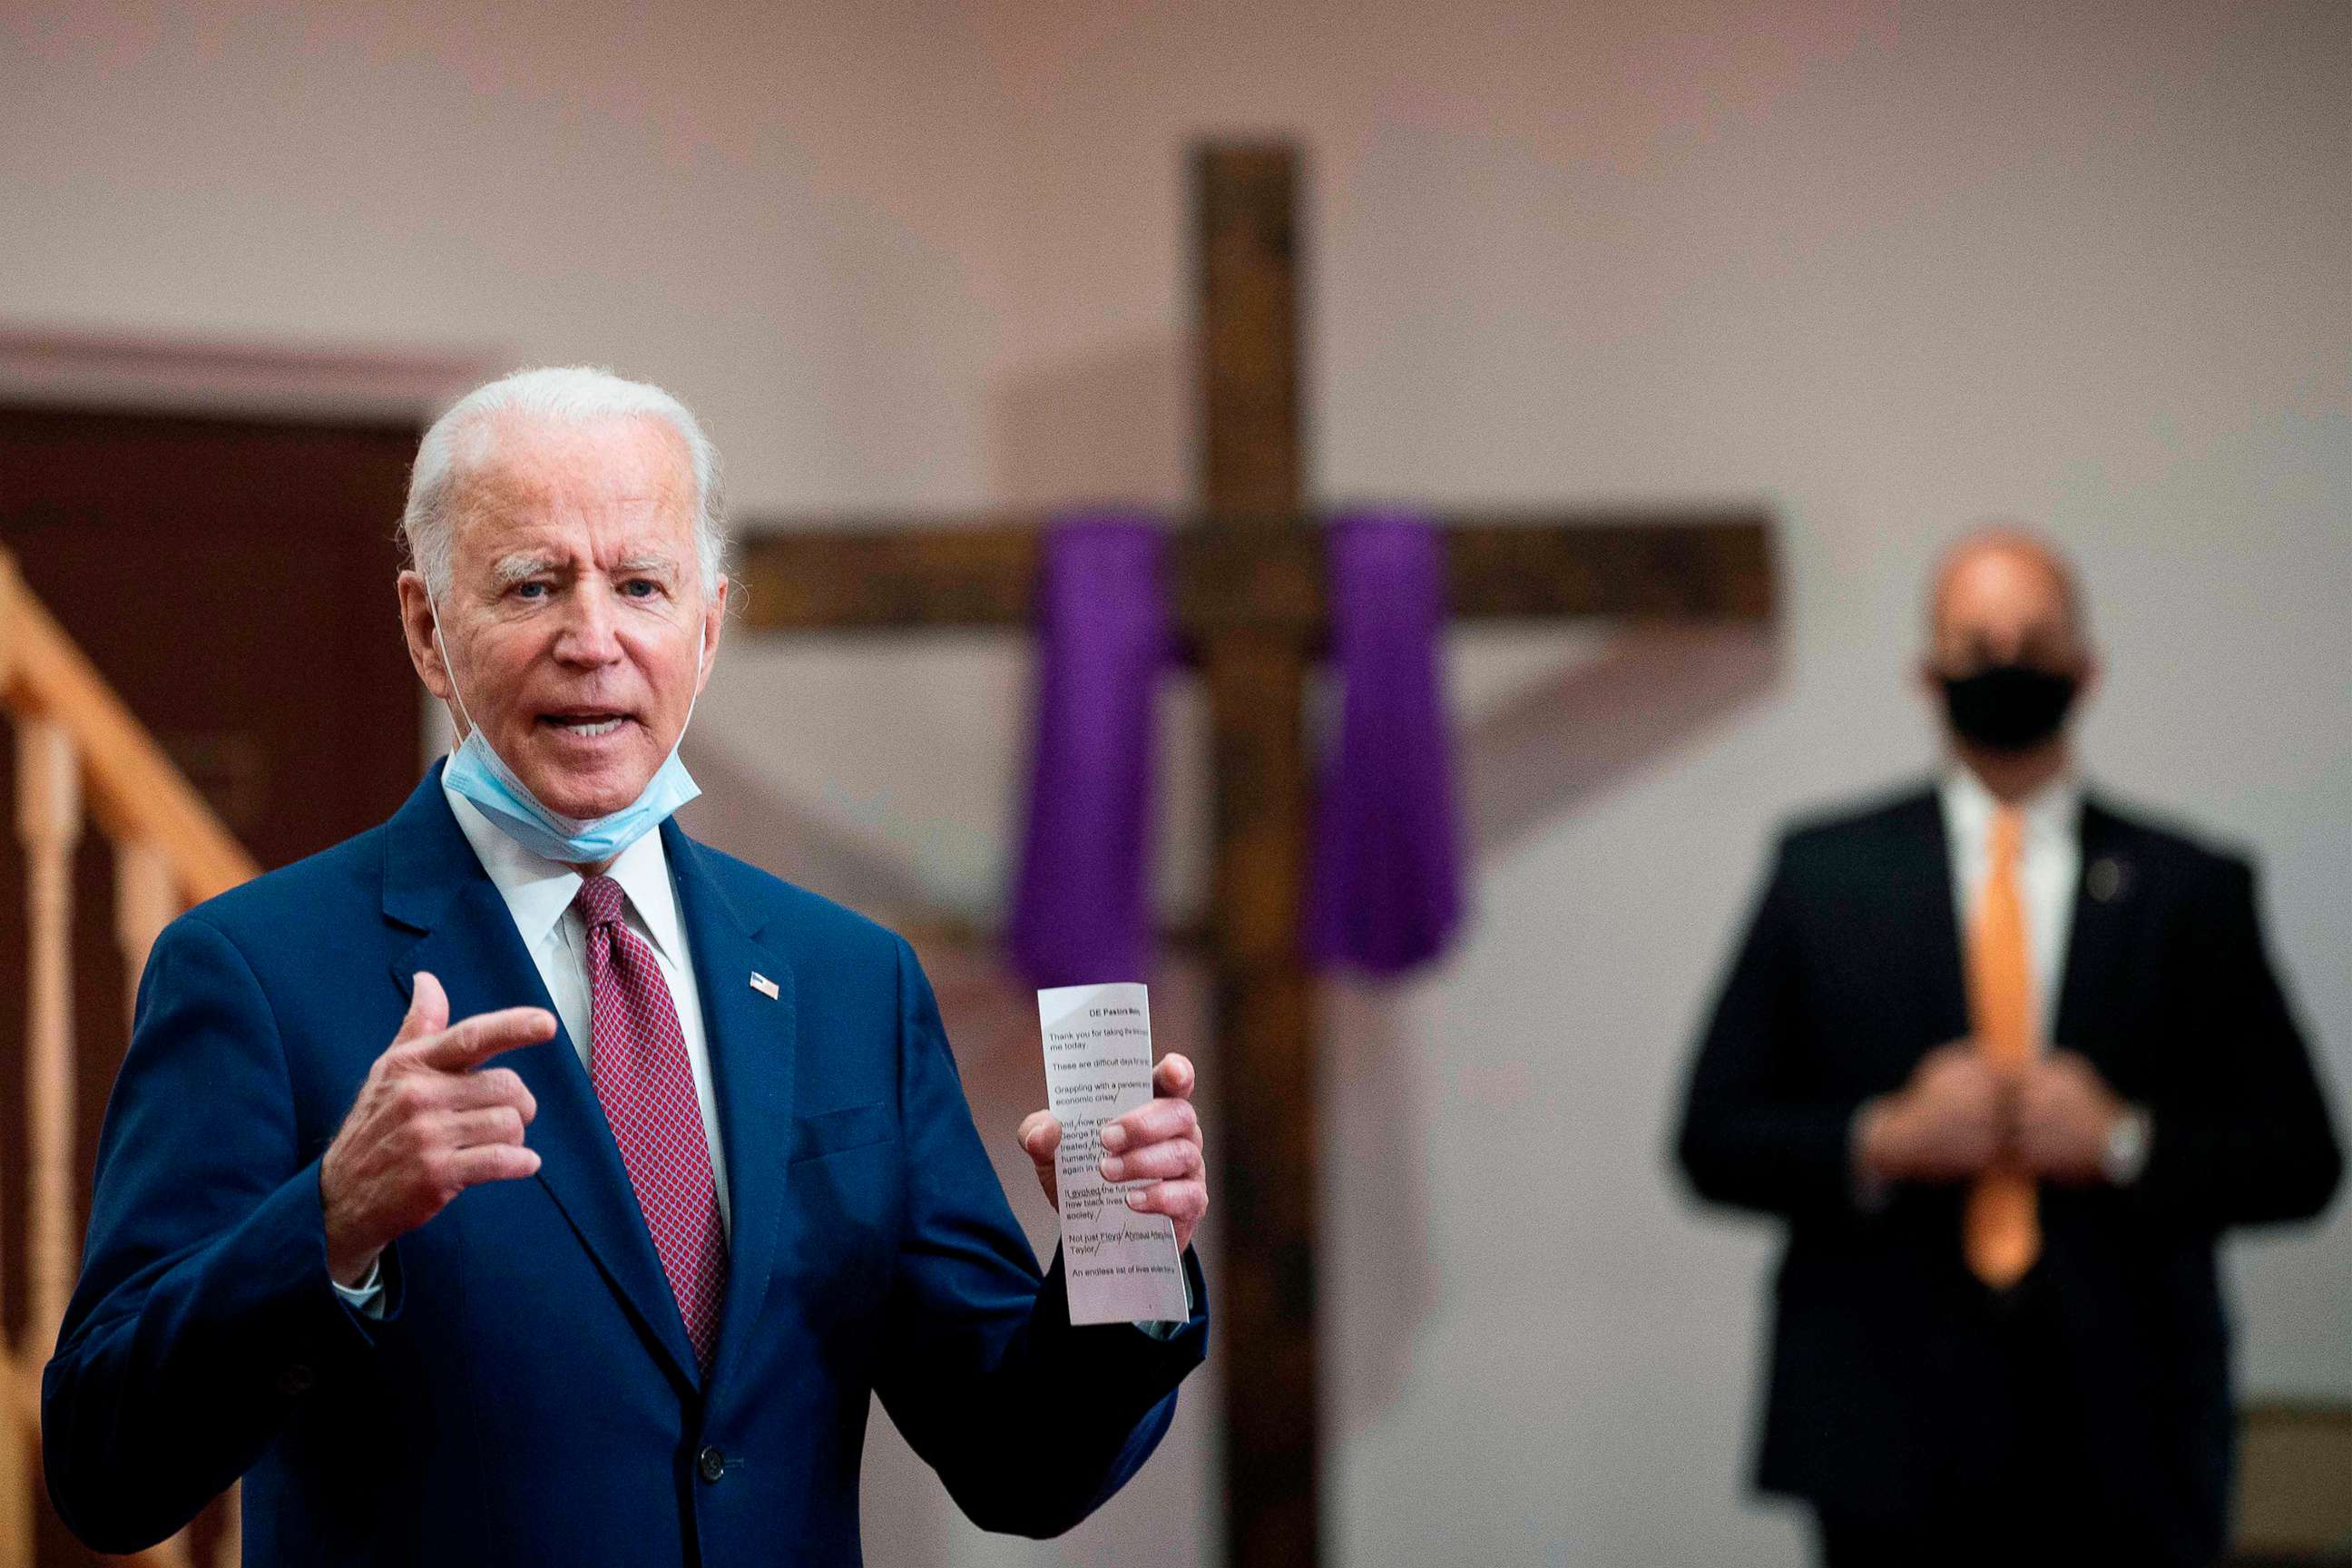 PHOTO: Former vice president and Democratic presidential candidate Joe Biden meets with clergy members and community activists during a visit to Bethel AME Church, in Wilmington, Delaware, June 1, 2020.